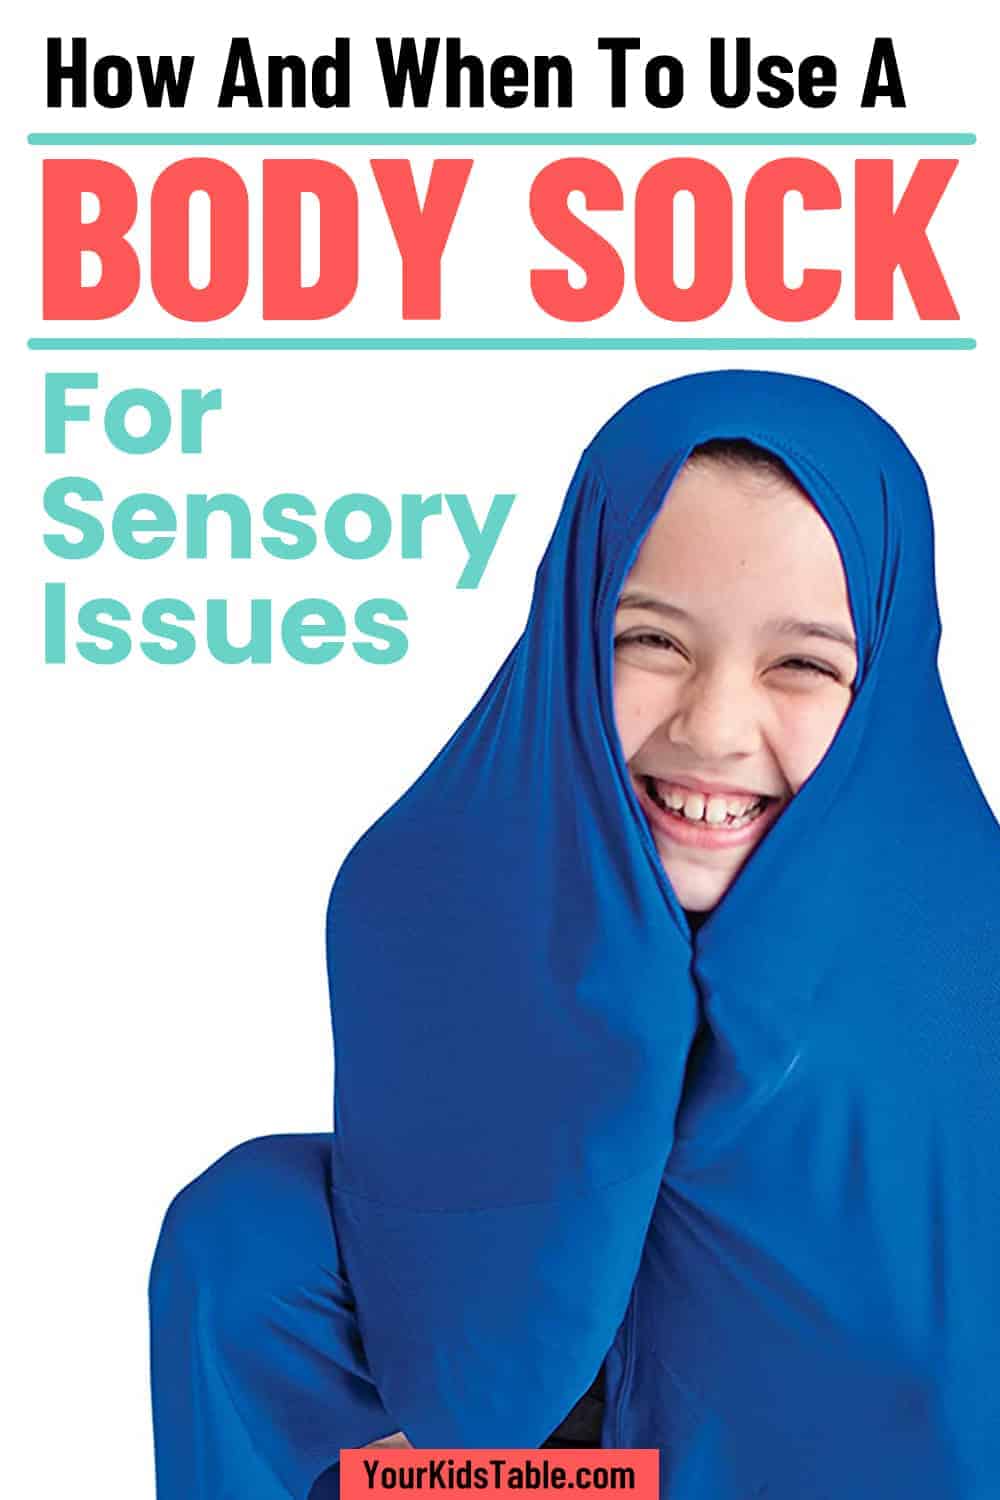 Discover when, why, and how to use sensory body socks to help kids calm and improve body awareness. Perfect for sensory seekers, check out this OT's top picks.